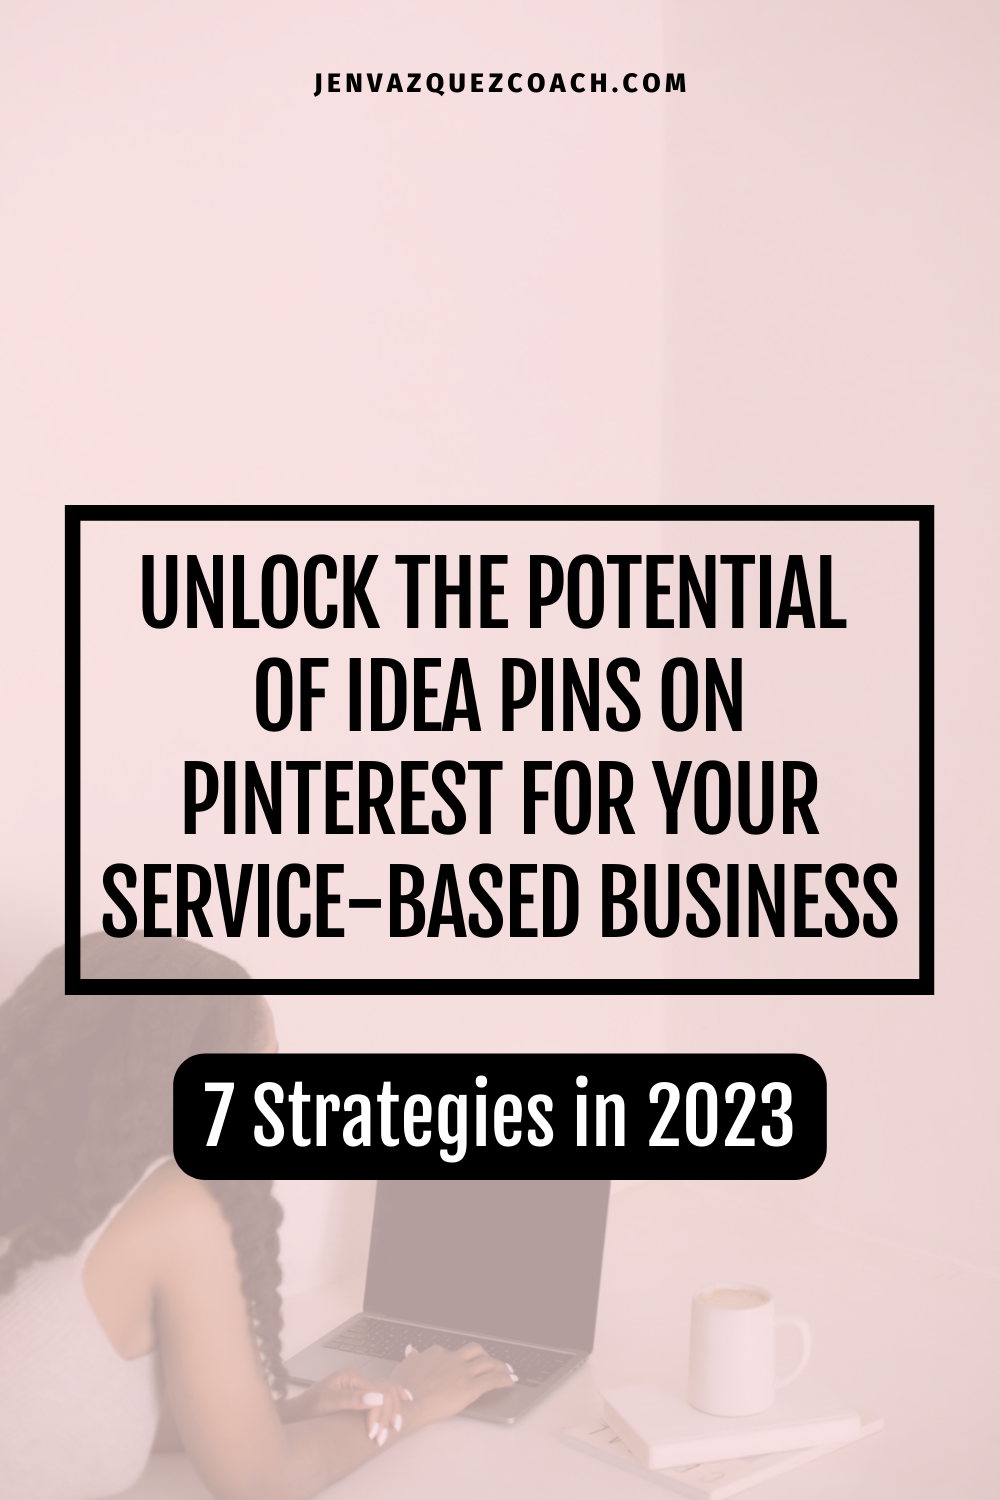 Unlock the Potential of Idea Pins on Pinterest for Your Service-Based Business 7 Strategies in 2023